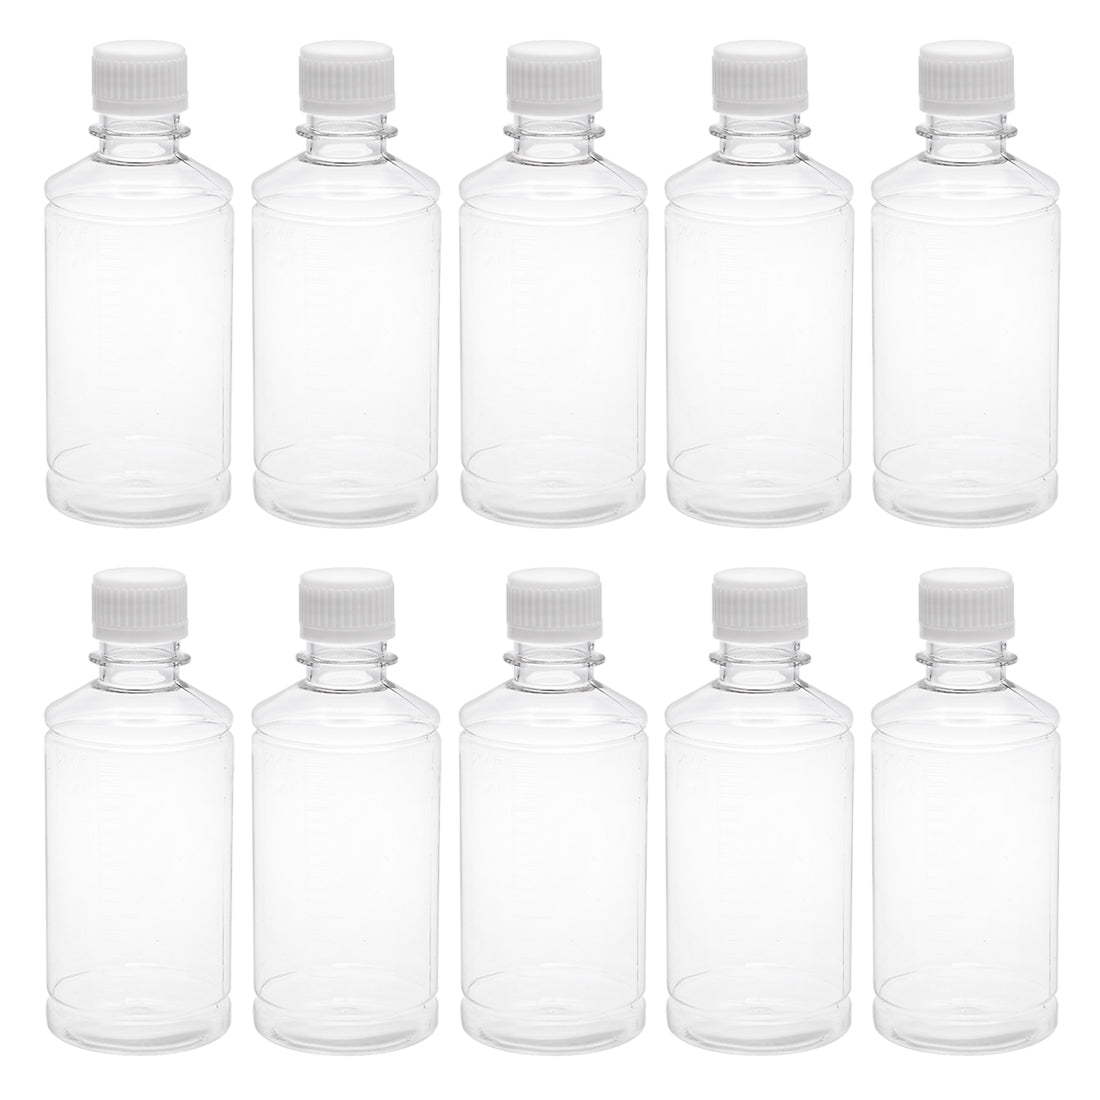 Uxcell Uxcell 8.5 oz/250ml Plastic Lab Chemical Reagent Bottle Small Mouth Liquid/ Solid Storage Container Clear Bottles w Tamper Evident Caps 10pcs